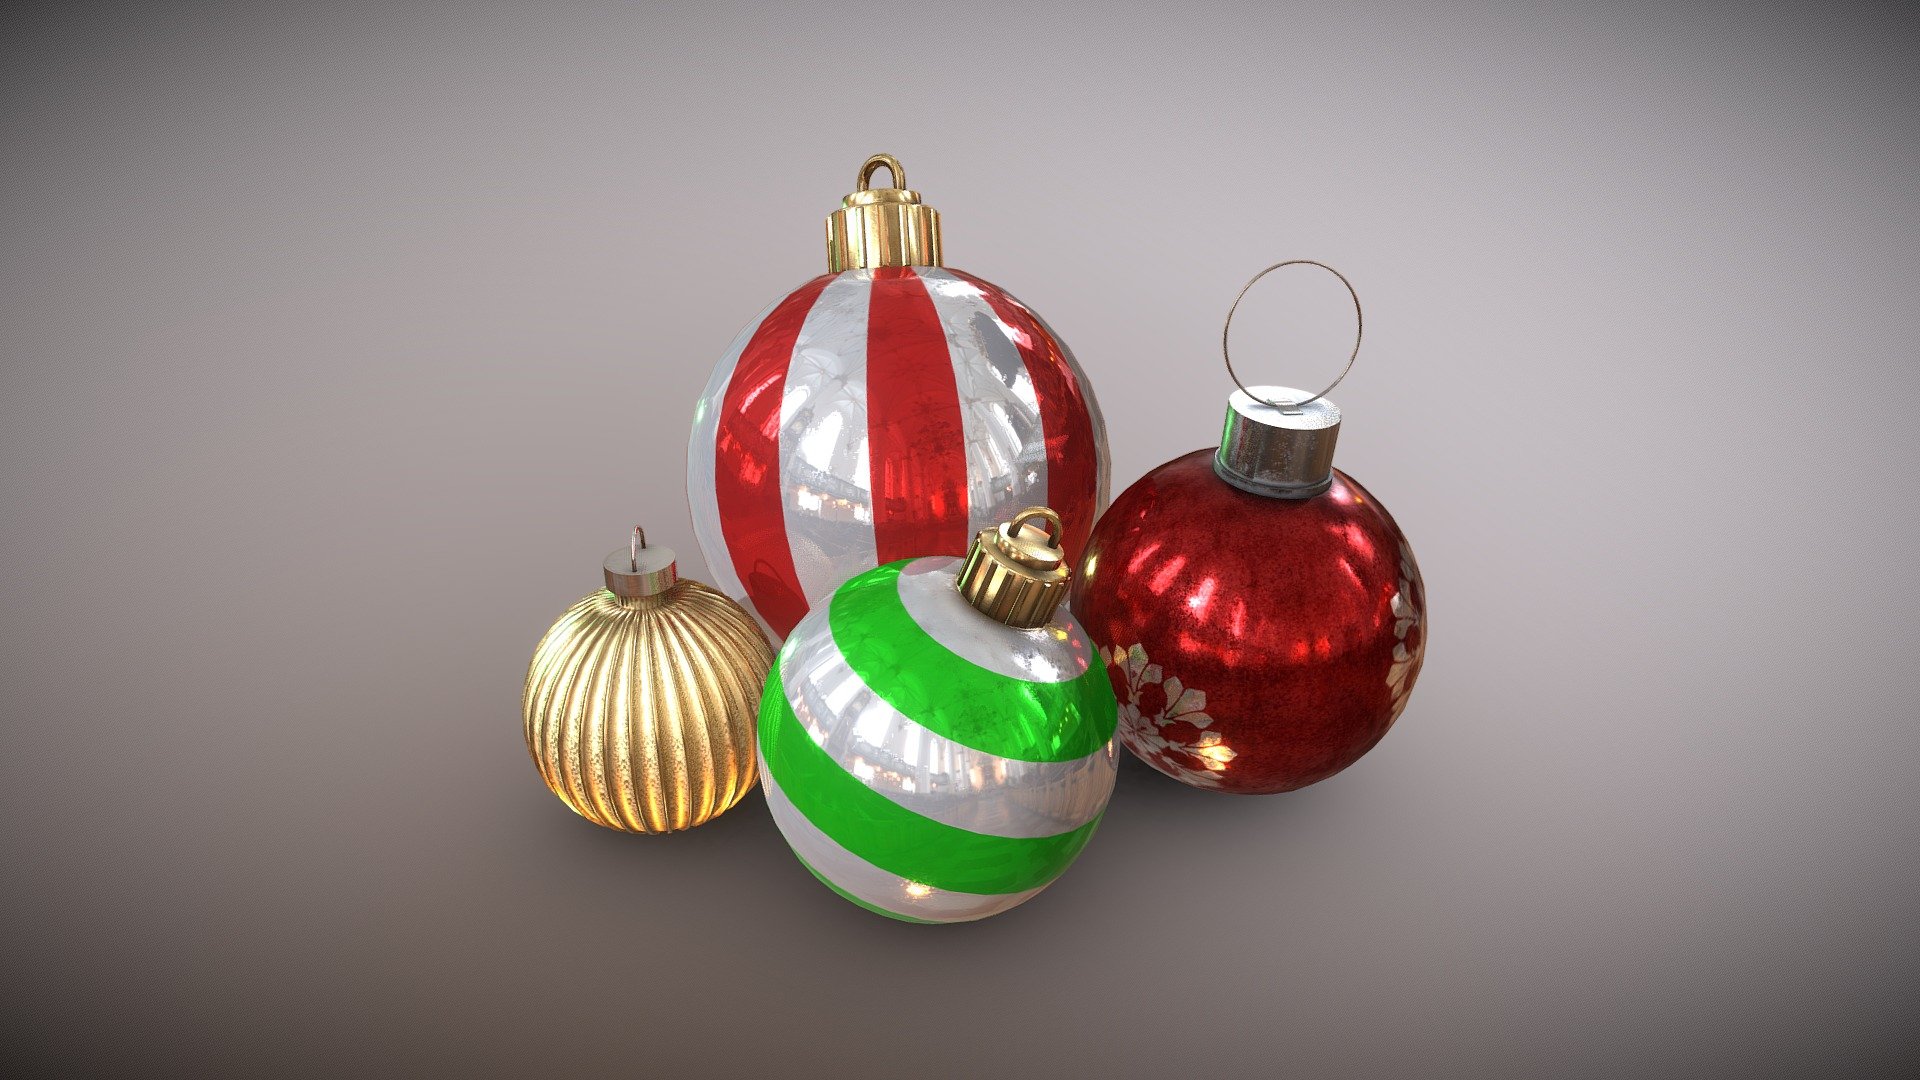 Сlassic Christmas tree decorations

Textures size 4096x4096

Including maps: * Base Color * Roughness * Metallic * Normal * Height * AO

Created in Blender The texture was created in Substance 3D Painter - New Year's Toys - Buy Royalty Free 3D model by exiS7-Gs 3d model